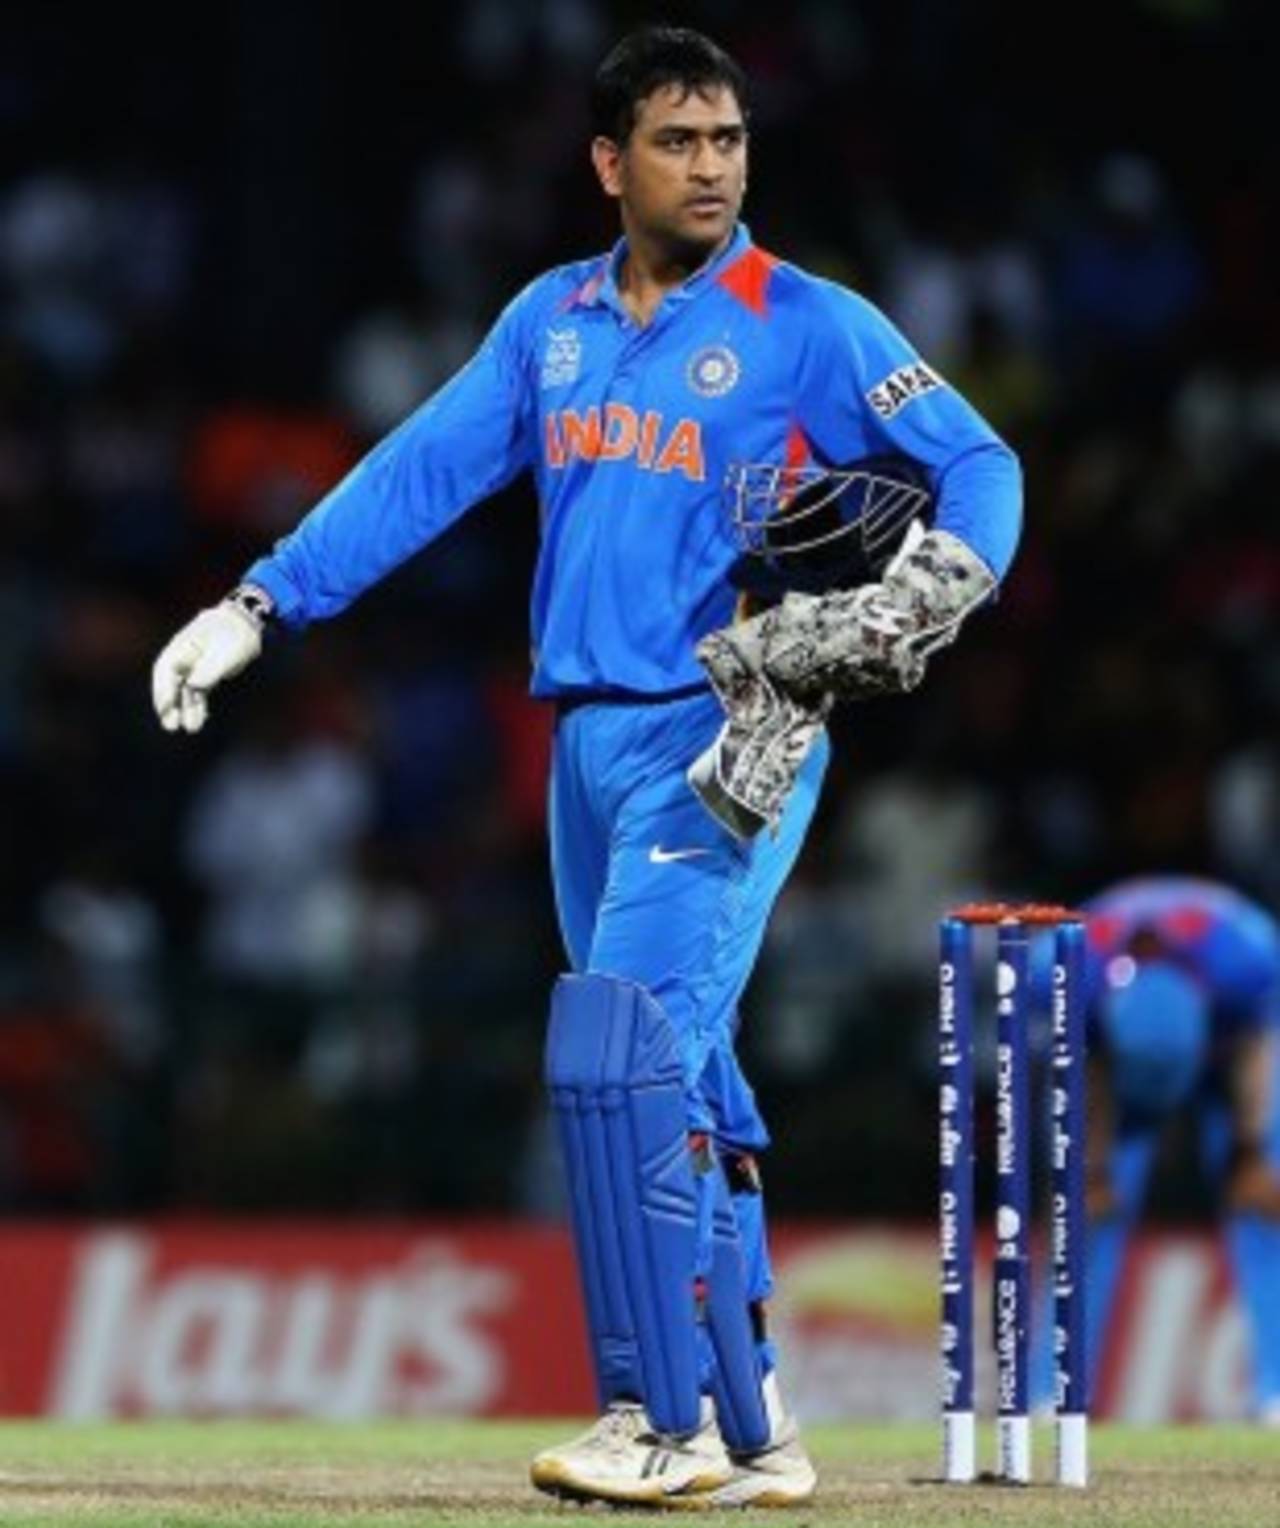 MS Dhoni looks on after India are eliminated, India v South Africa, Super Eights, World Twenty20, Colombo, October 2, 2012